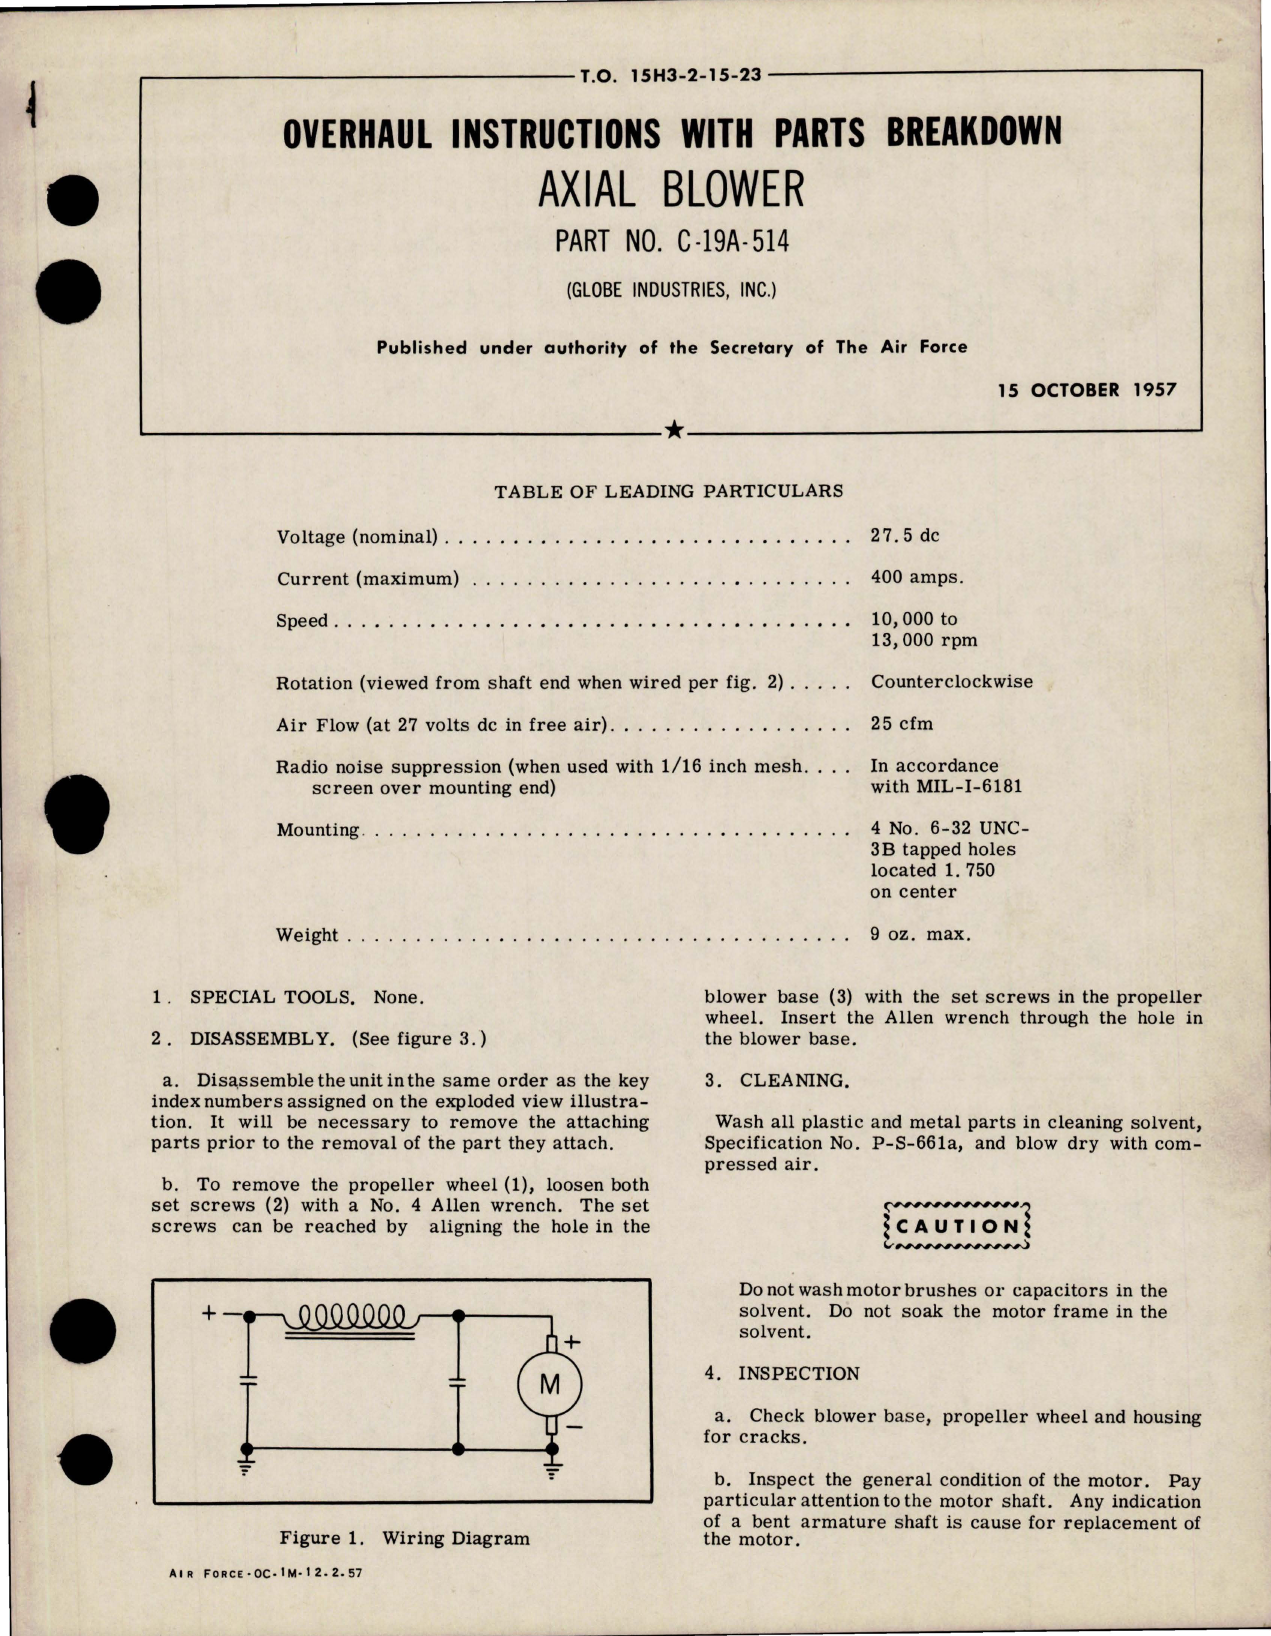 Sample page 1 from AirCorps Library document: Overhaul Instructions with Parts for Axial Blower - Part C-19A-514 